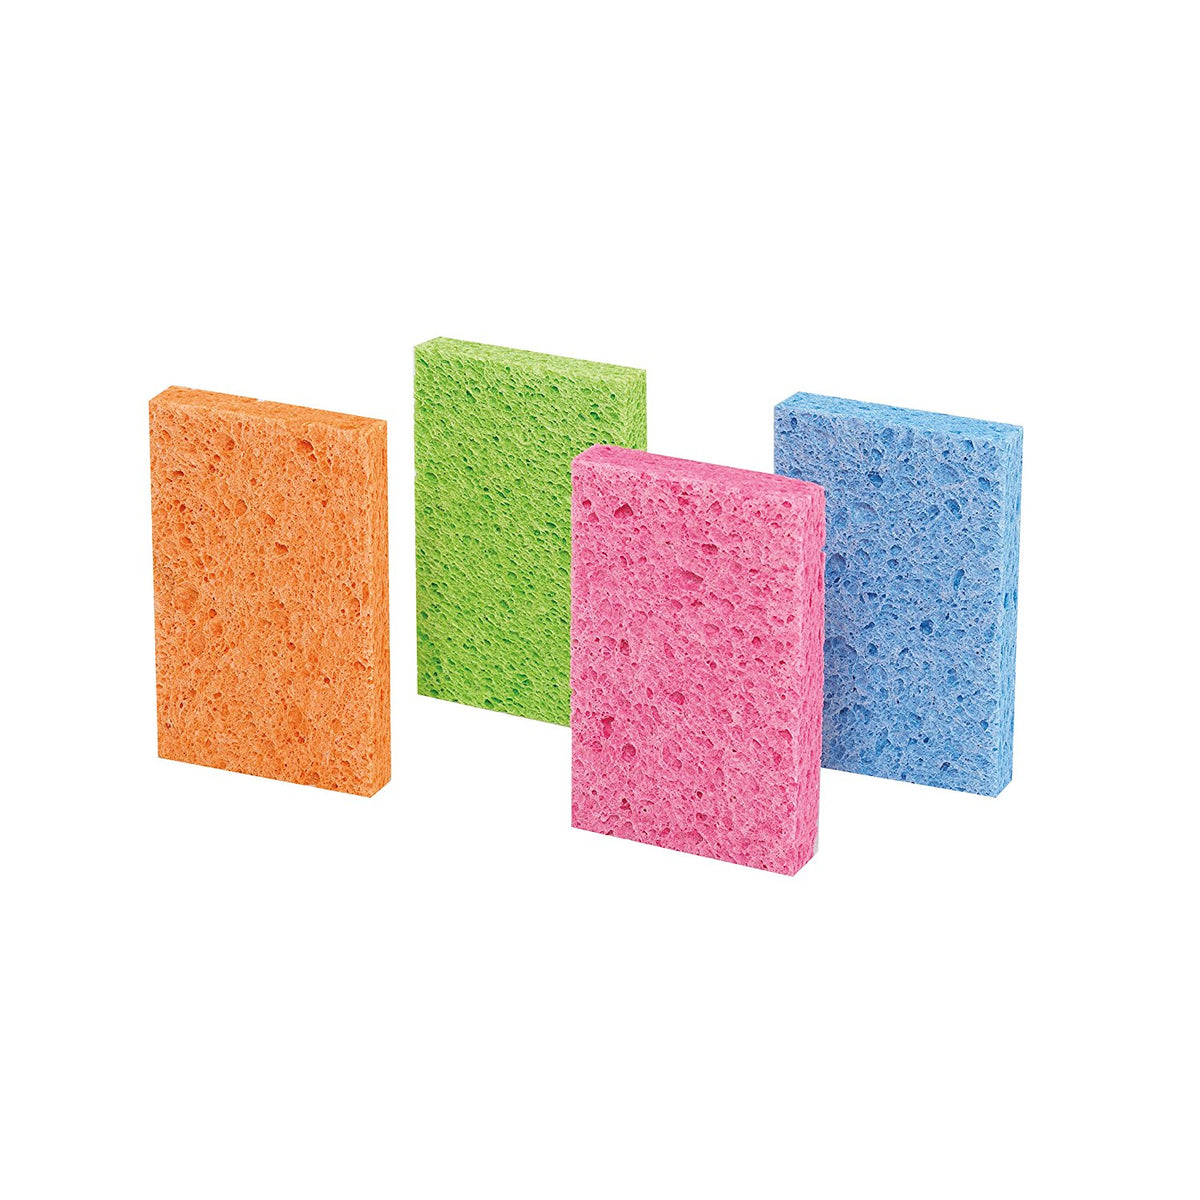 O-Cel-O 7274-FD Handy Size Sponges, Assorted Colors, 4-Count